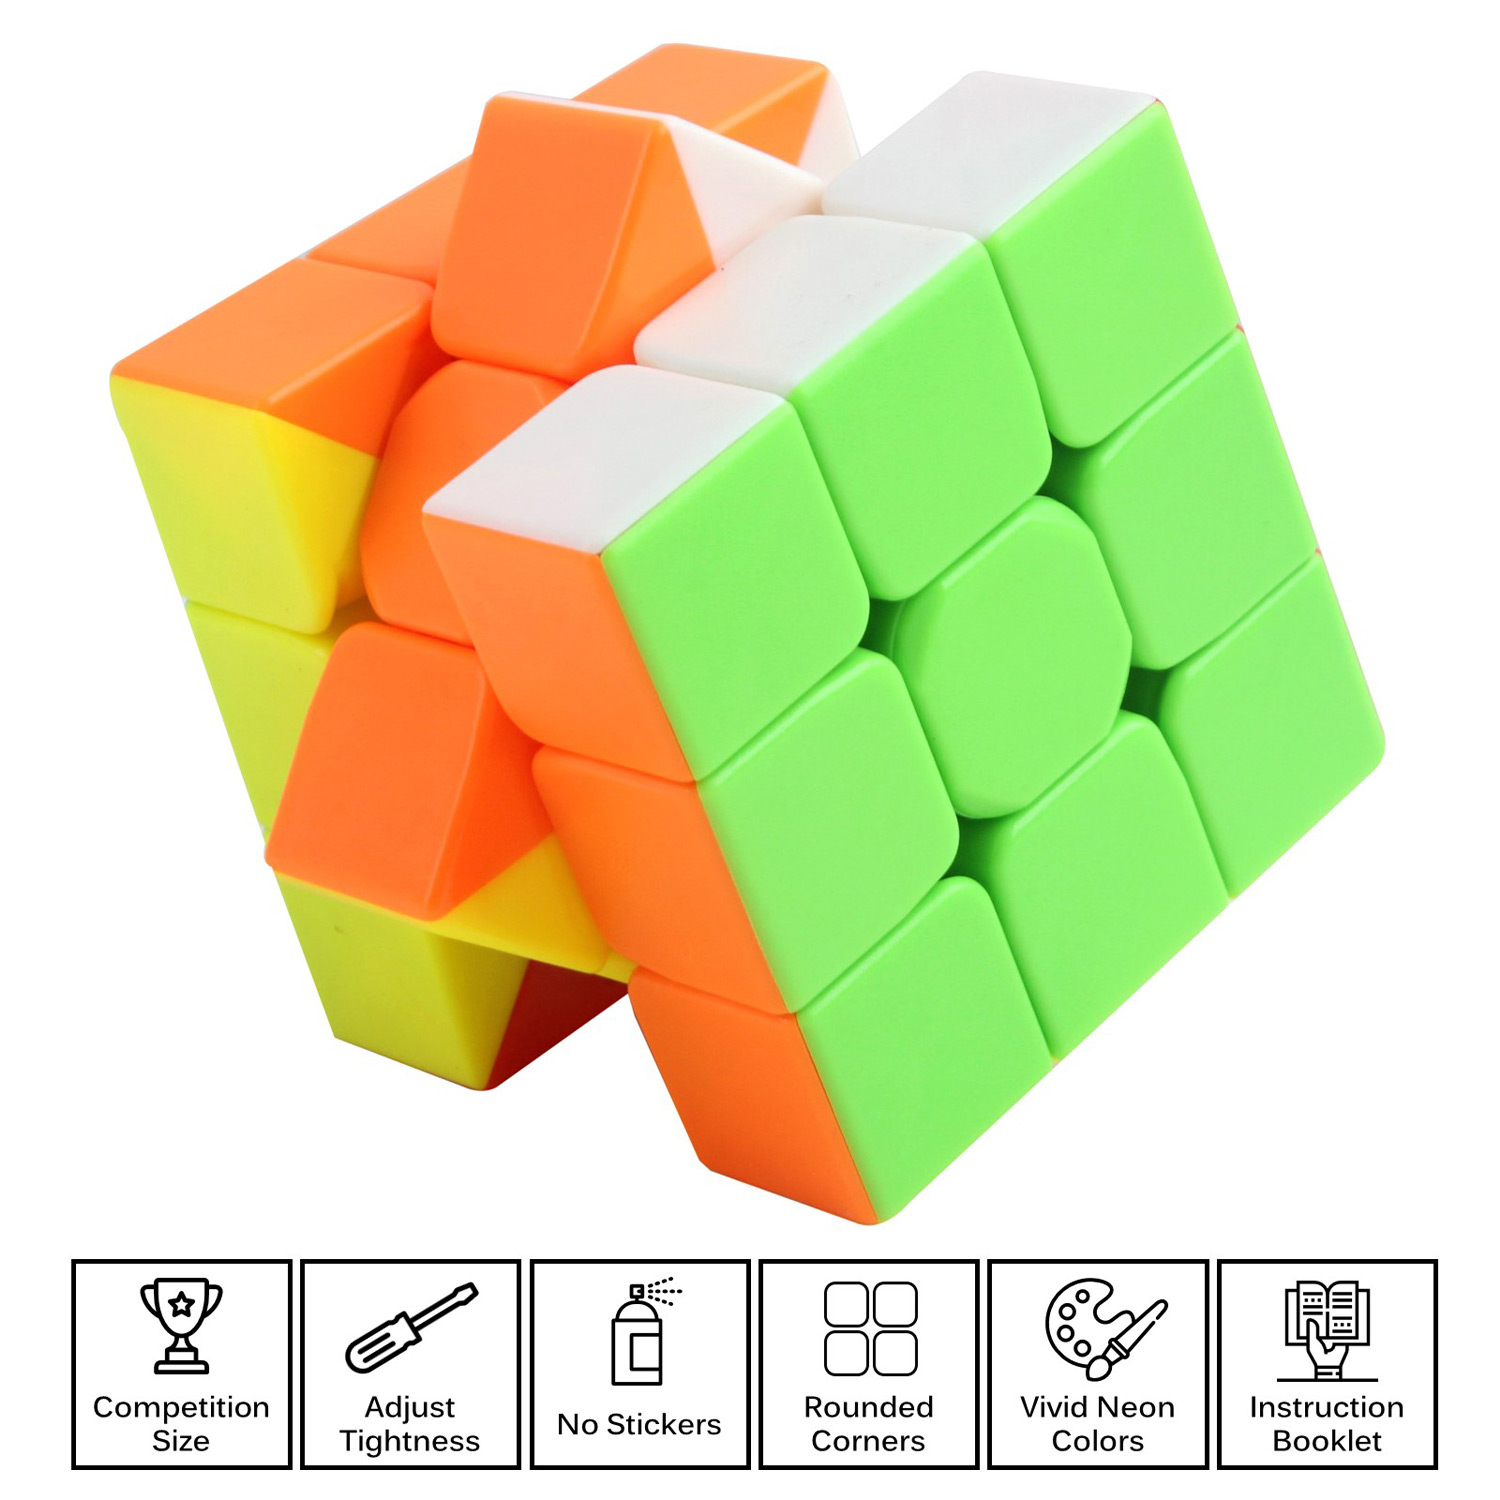 Speed Cube Turns Quick Rubiks Smooth Play Rubix Solid Durable Stickerless Smart Gaming Puzzle Modern Colors IQ Tester Magic Anti Stress Anti-anxiety Adults Kids Brain Teaser Toy